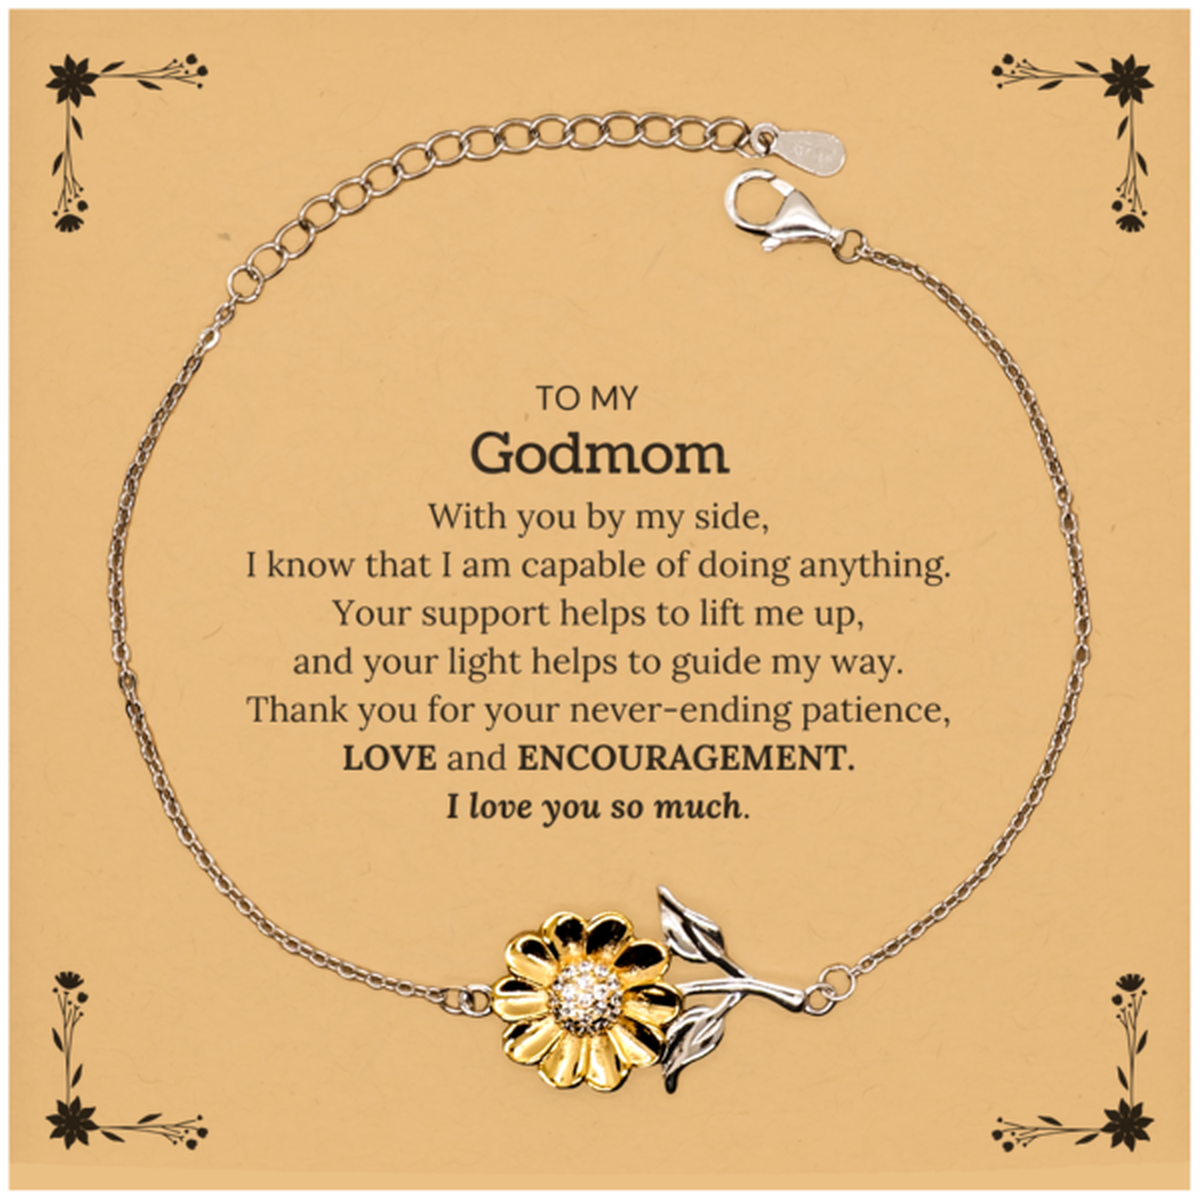 Appreciation Godmom Sunflower Bracelet Gifts, To My Godmom Birthday Christmas Wedding Keepsake Gifts for Godmom With you by my side, I know that I am capable of doing anything. I love you so much